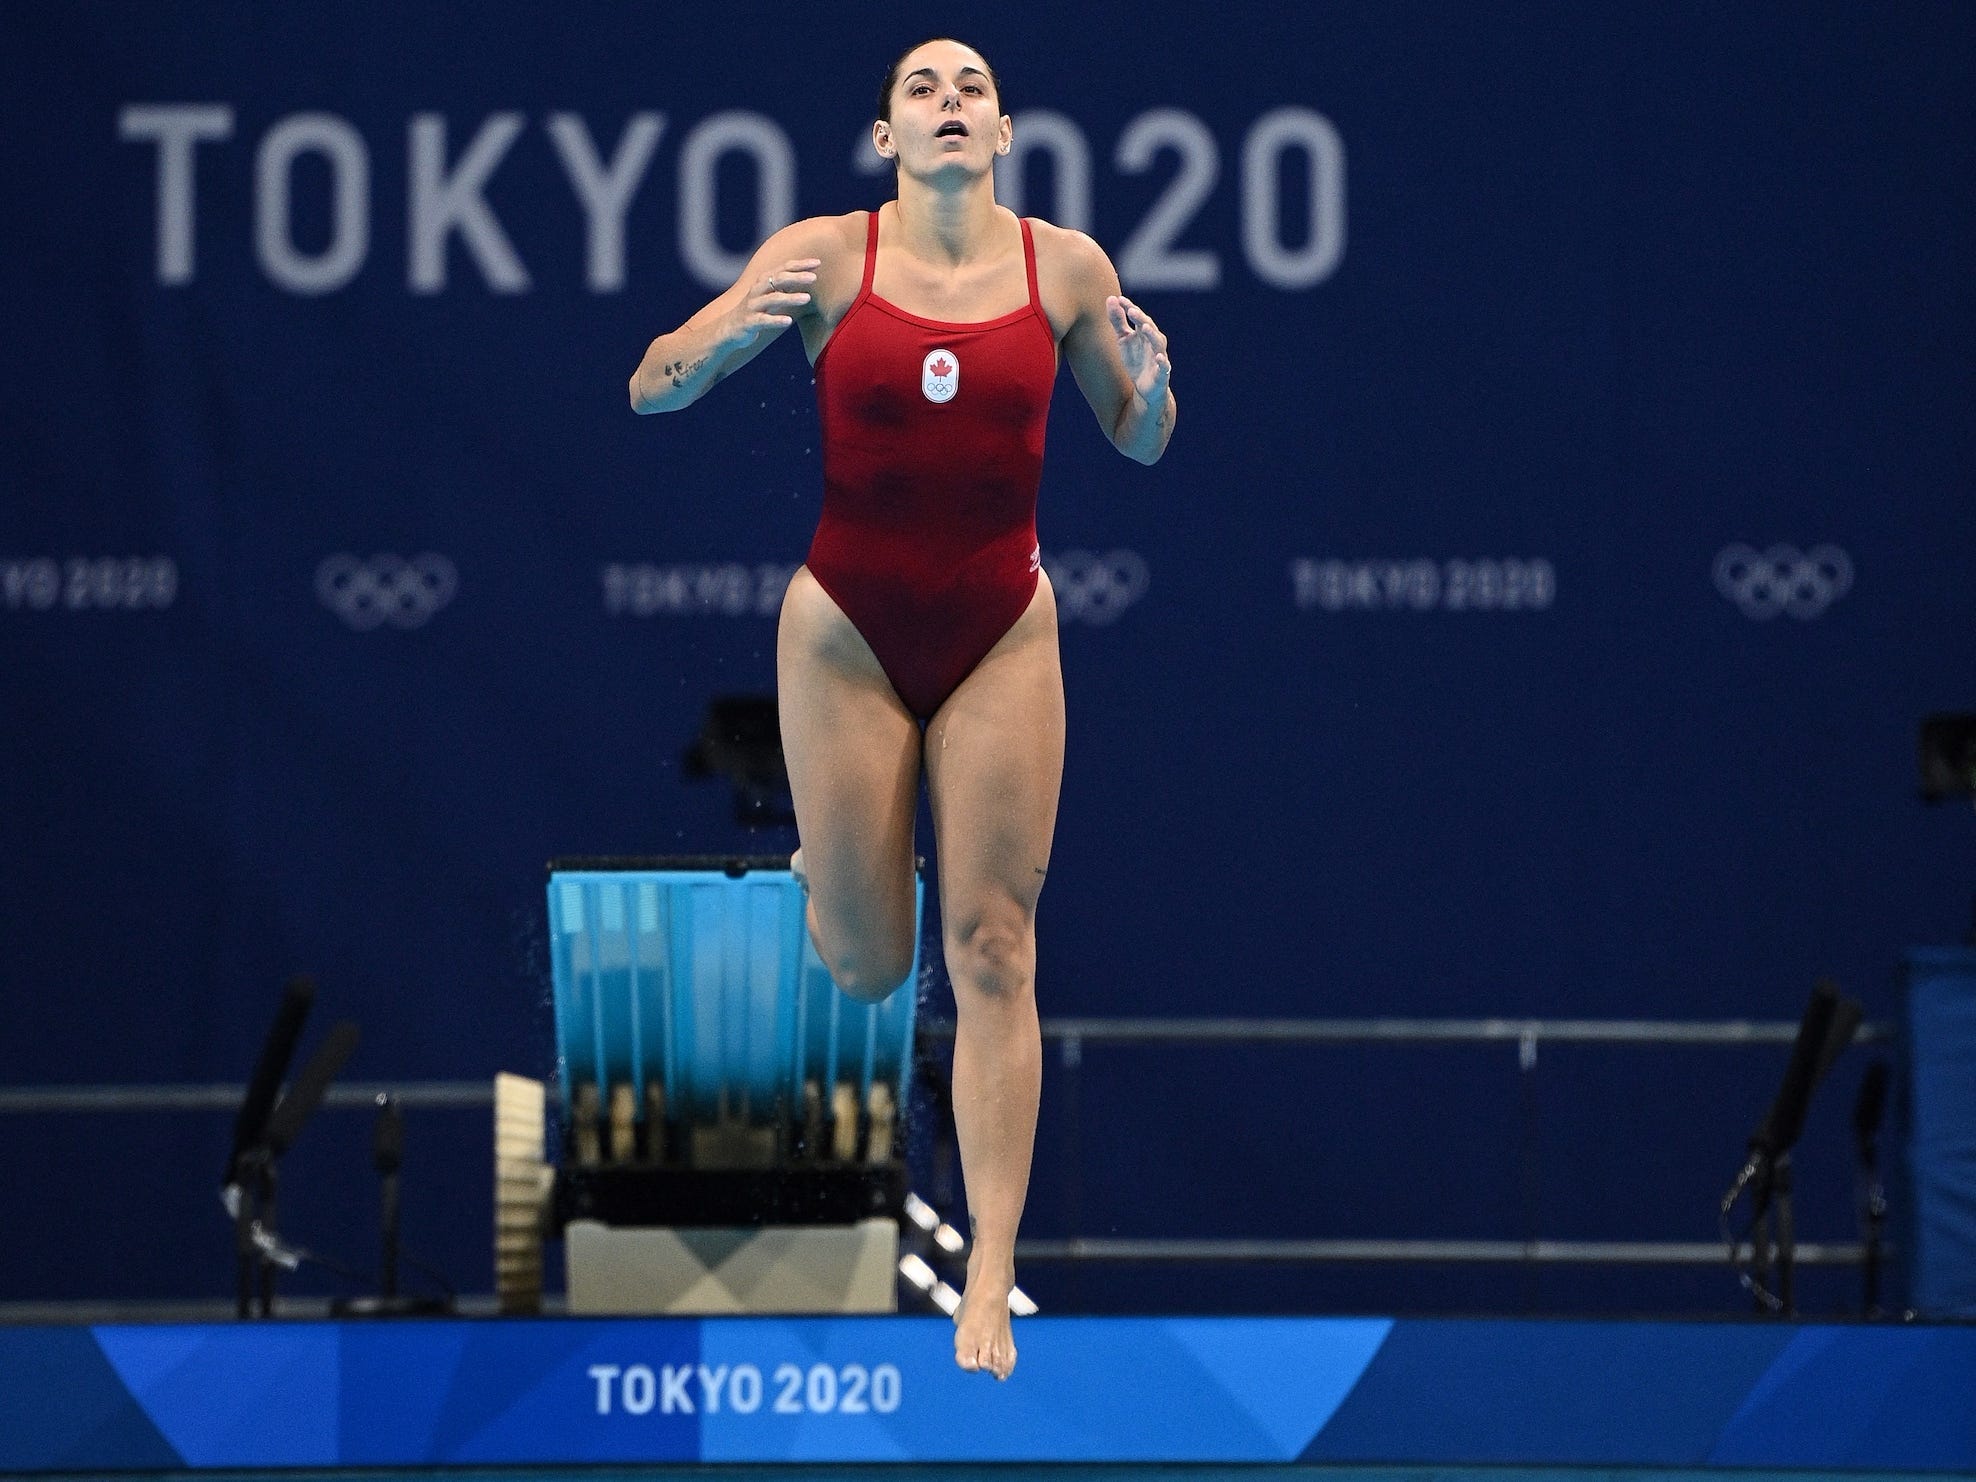 Pamela Ware slips on the diving board at the Olympics.